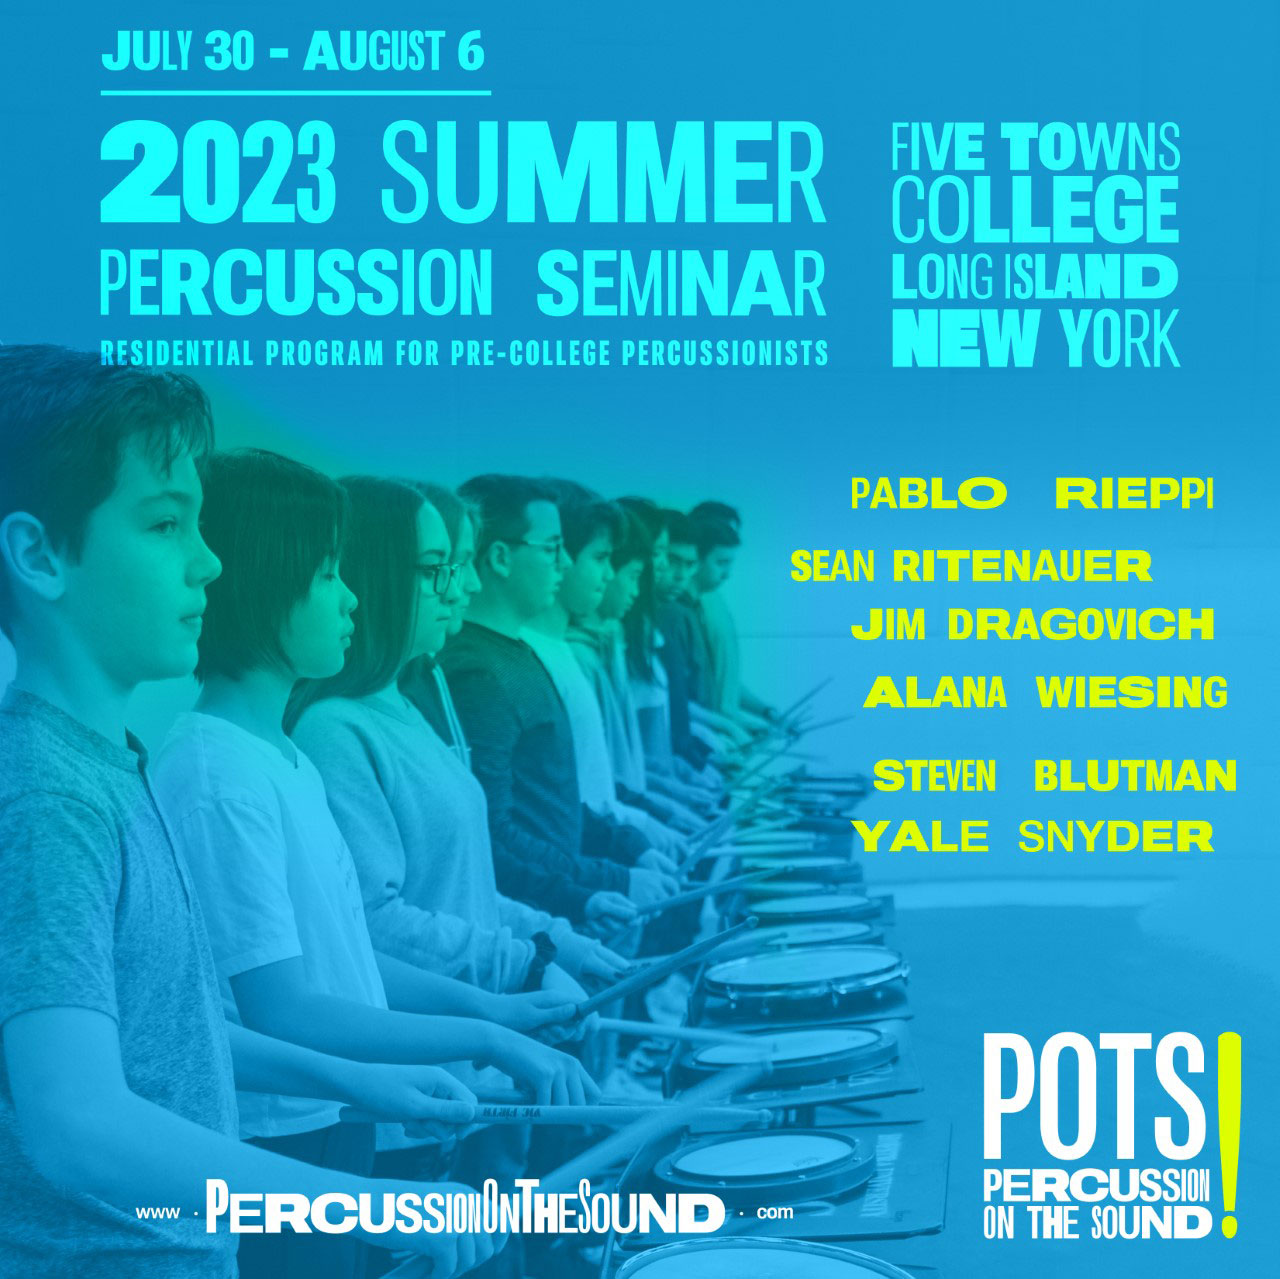 Five Towns College Hosts Percussion On The Sound (POTS) This Summer